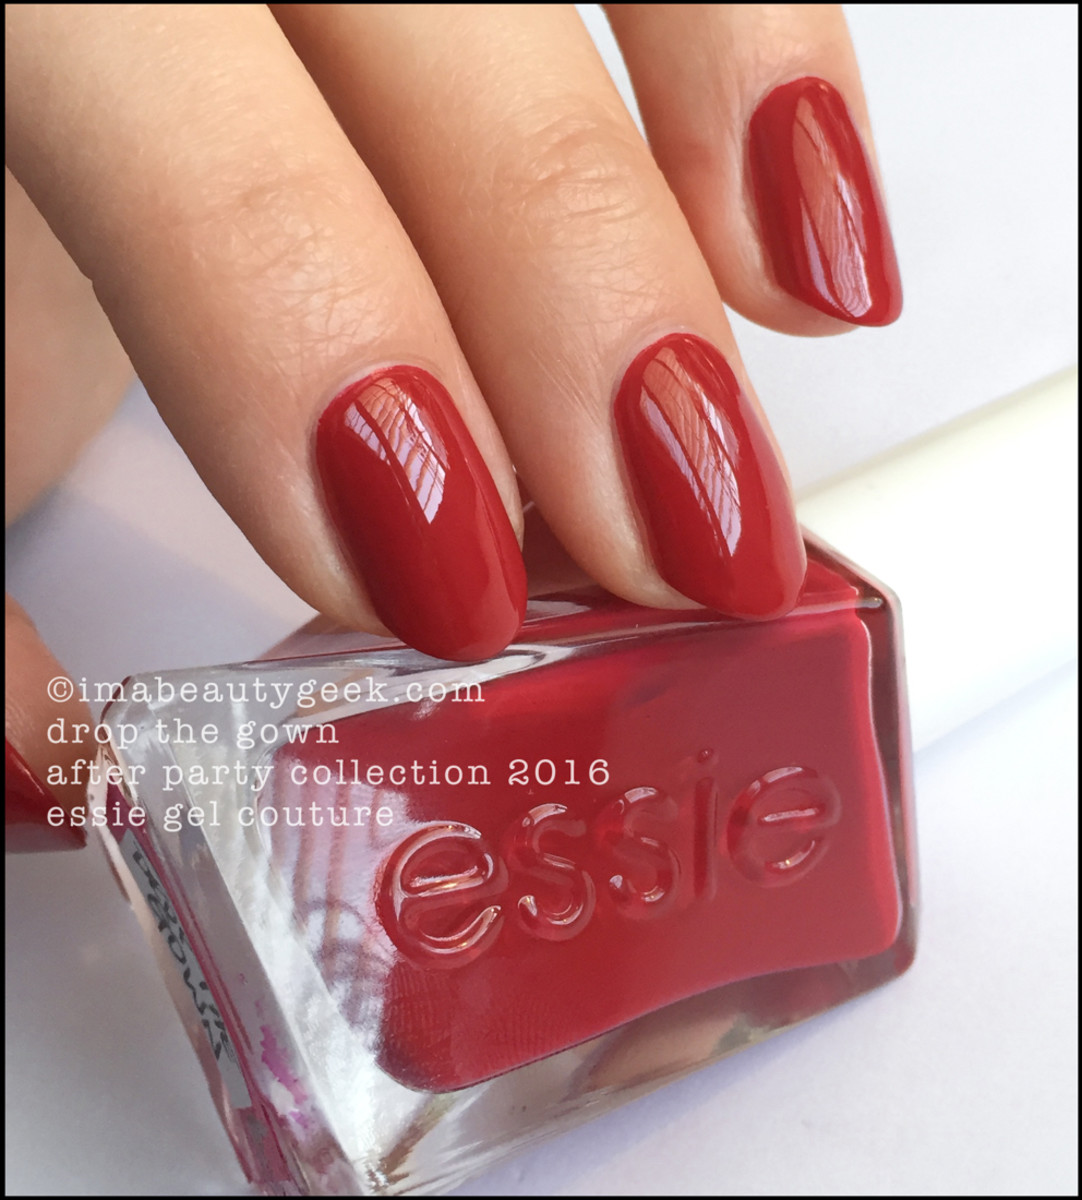 Essie Drop the Gown_Essie Gel Couture Review Swatches 2016